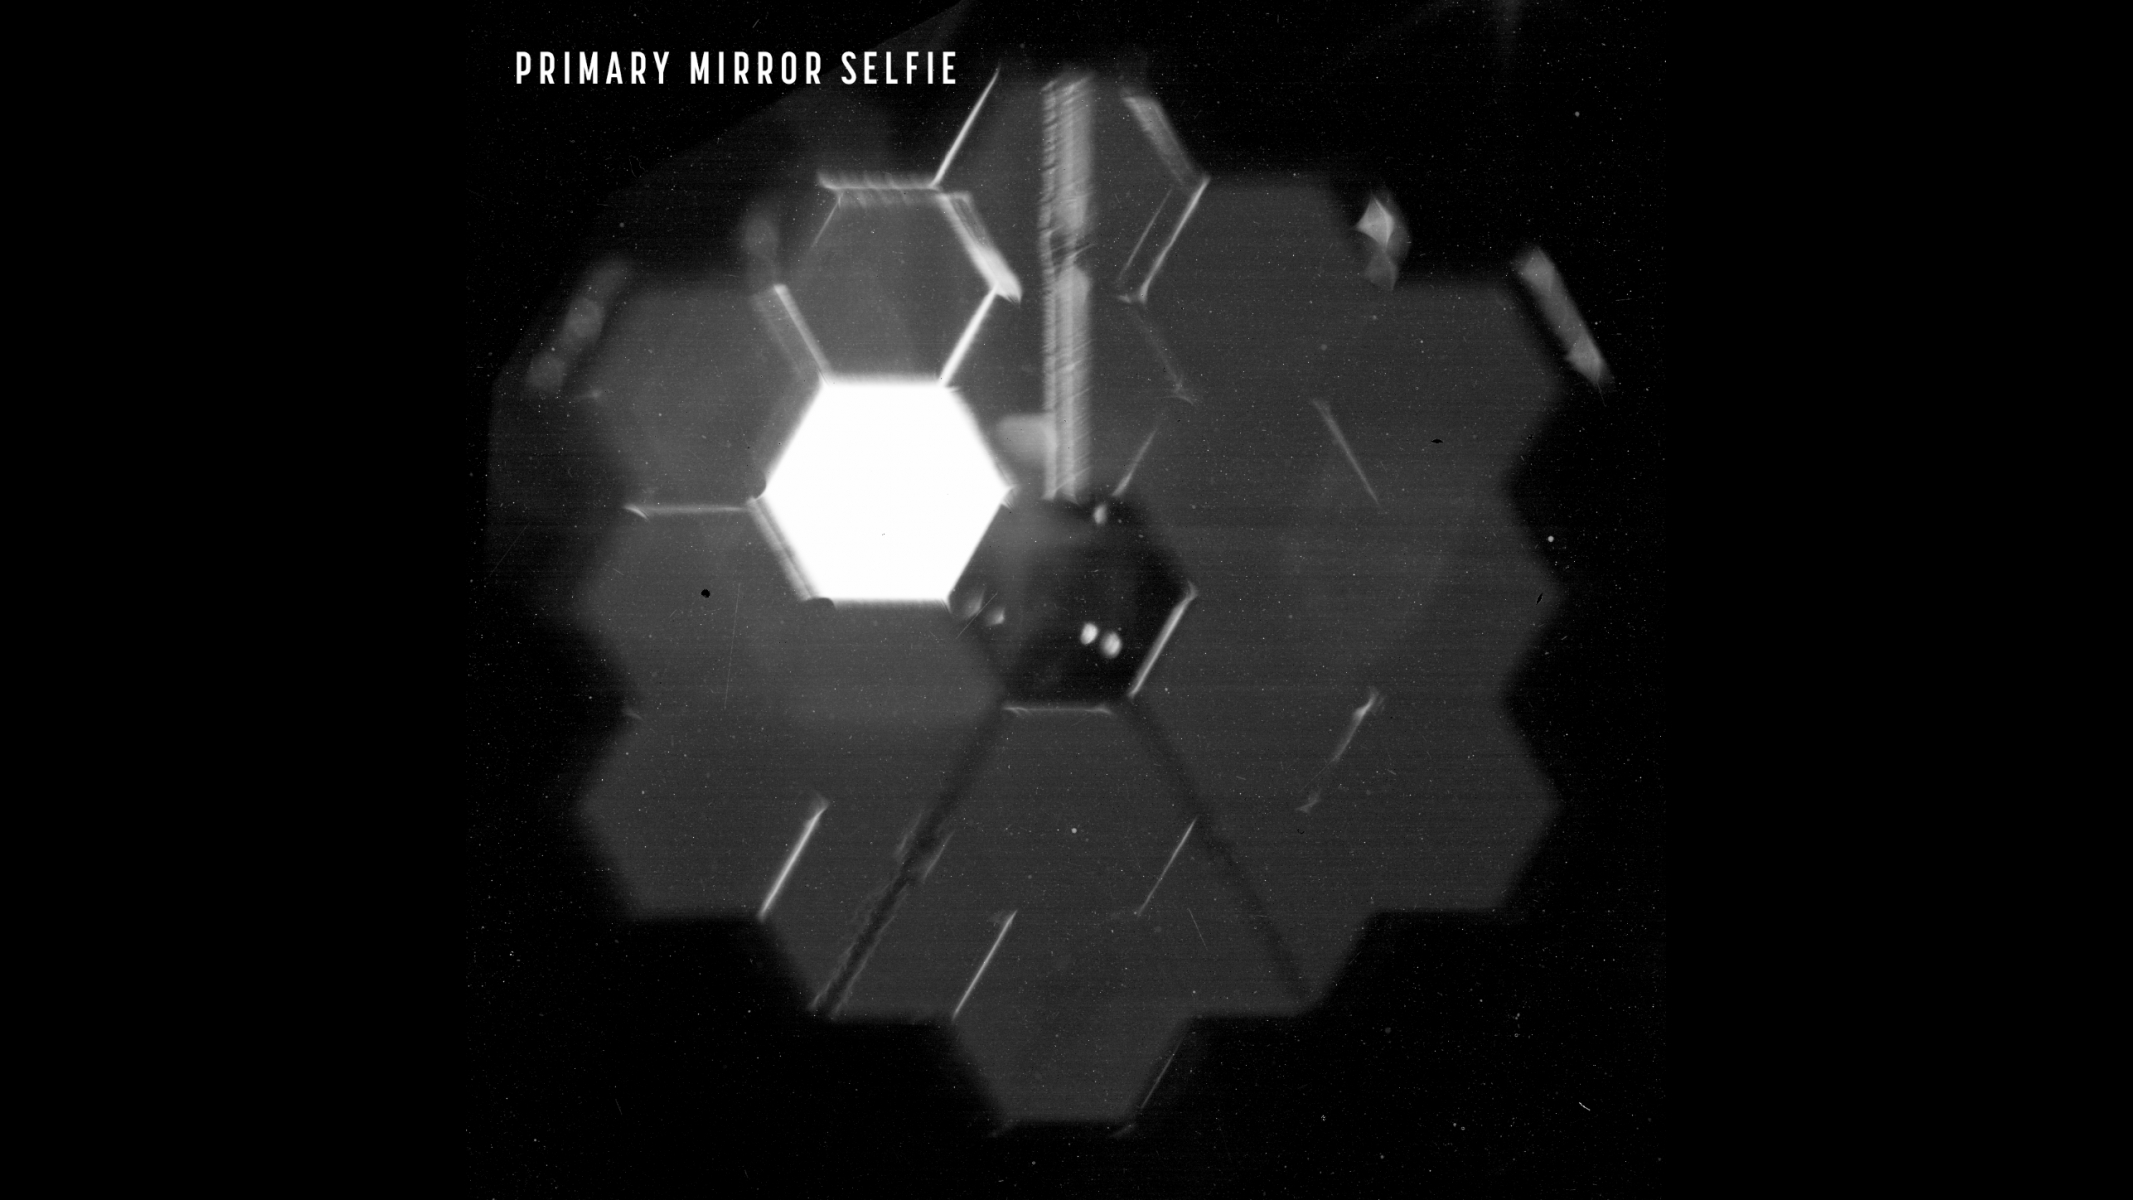 A "selfie" shows the 18 segments of the James Webb Space Telescope's primary mirror as seen from a specialized camera inside the NIRCam instrument.